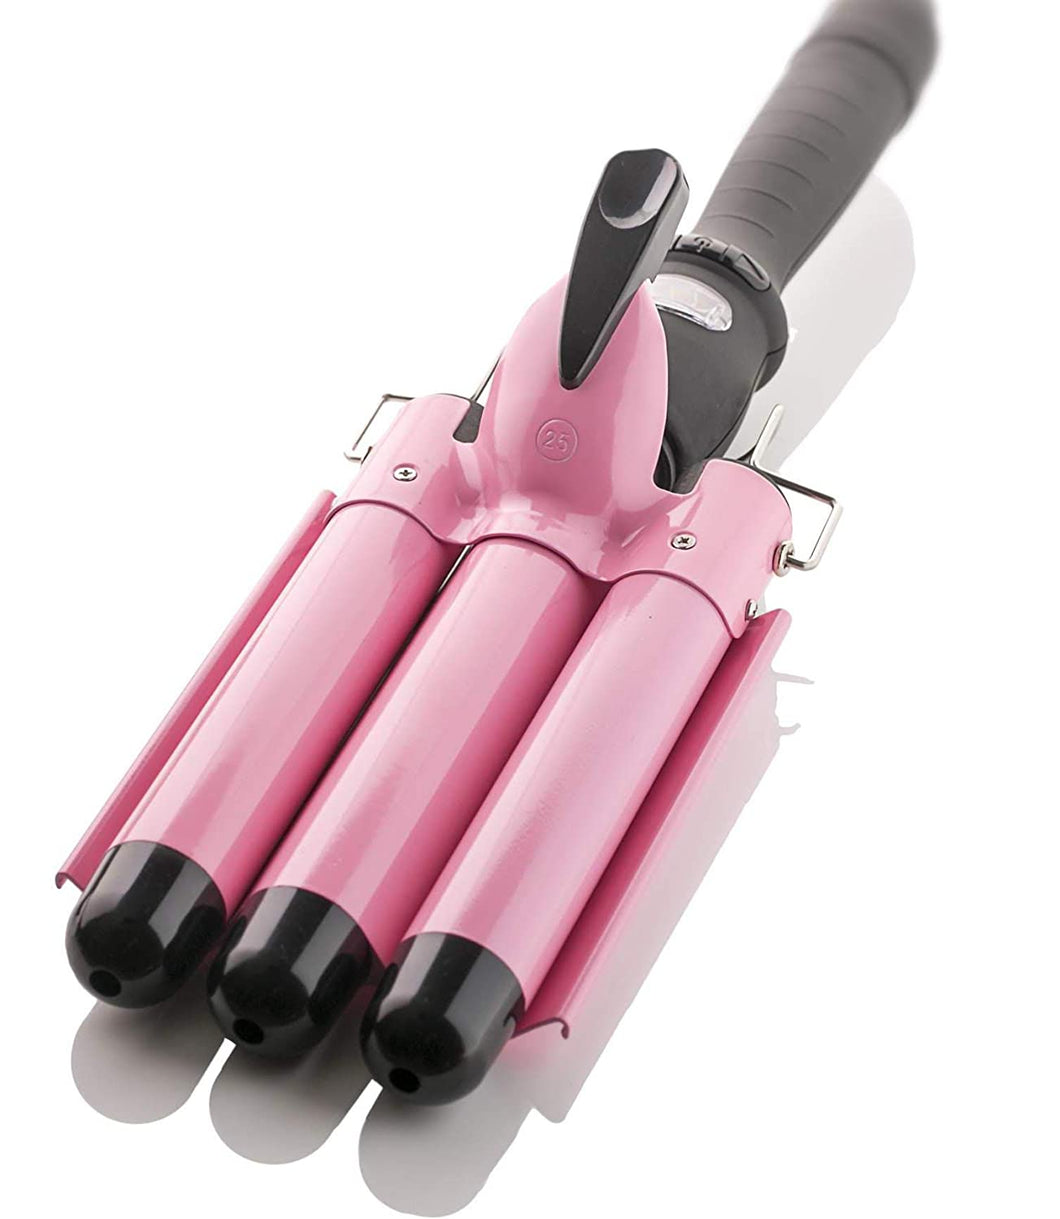 Three Barrel Curling Iron Wand with LCD Temperature Display